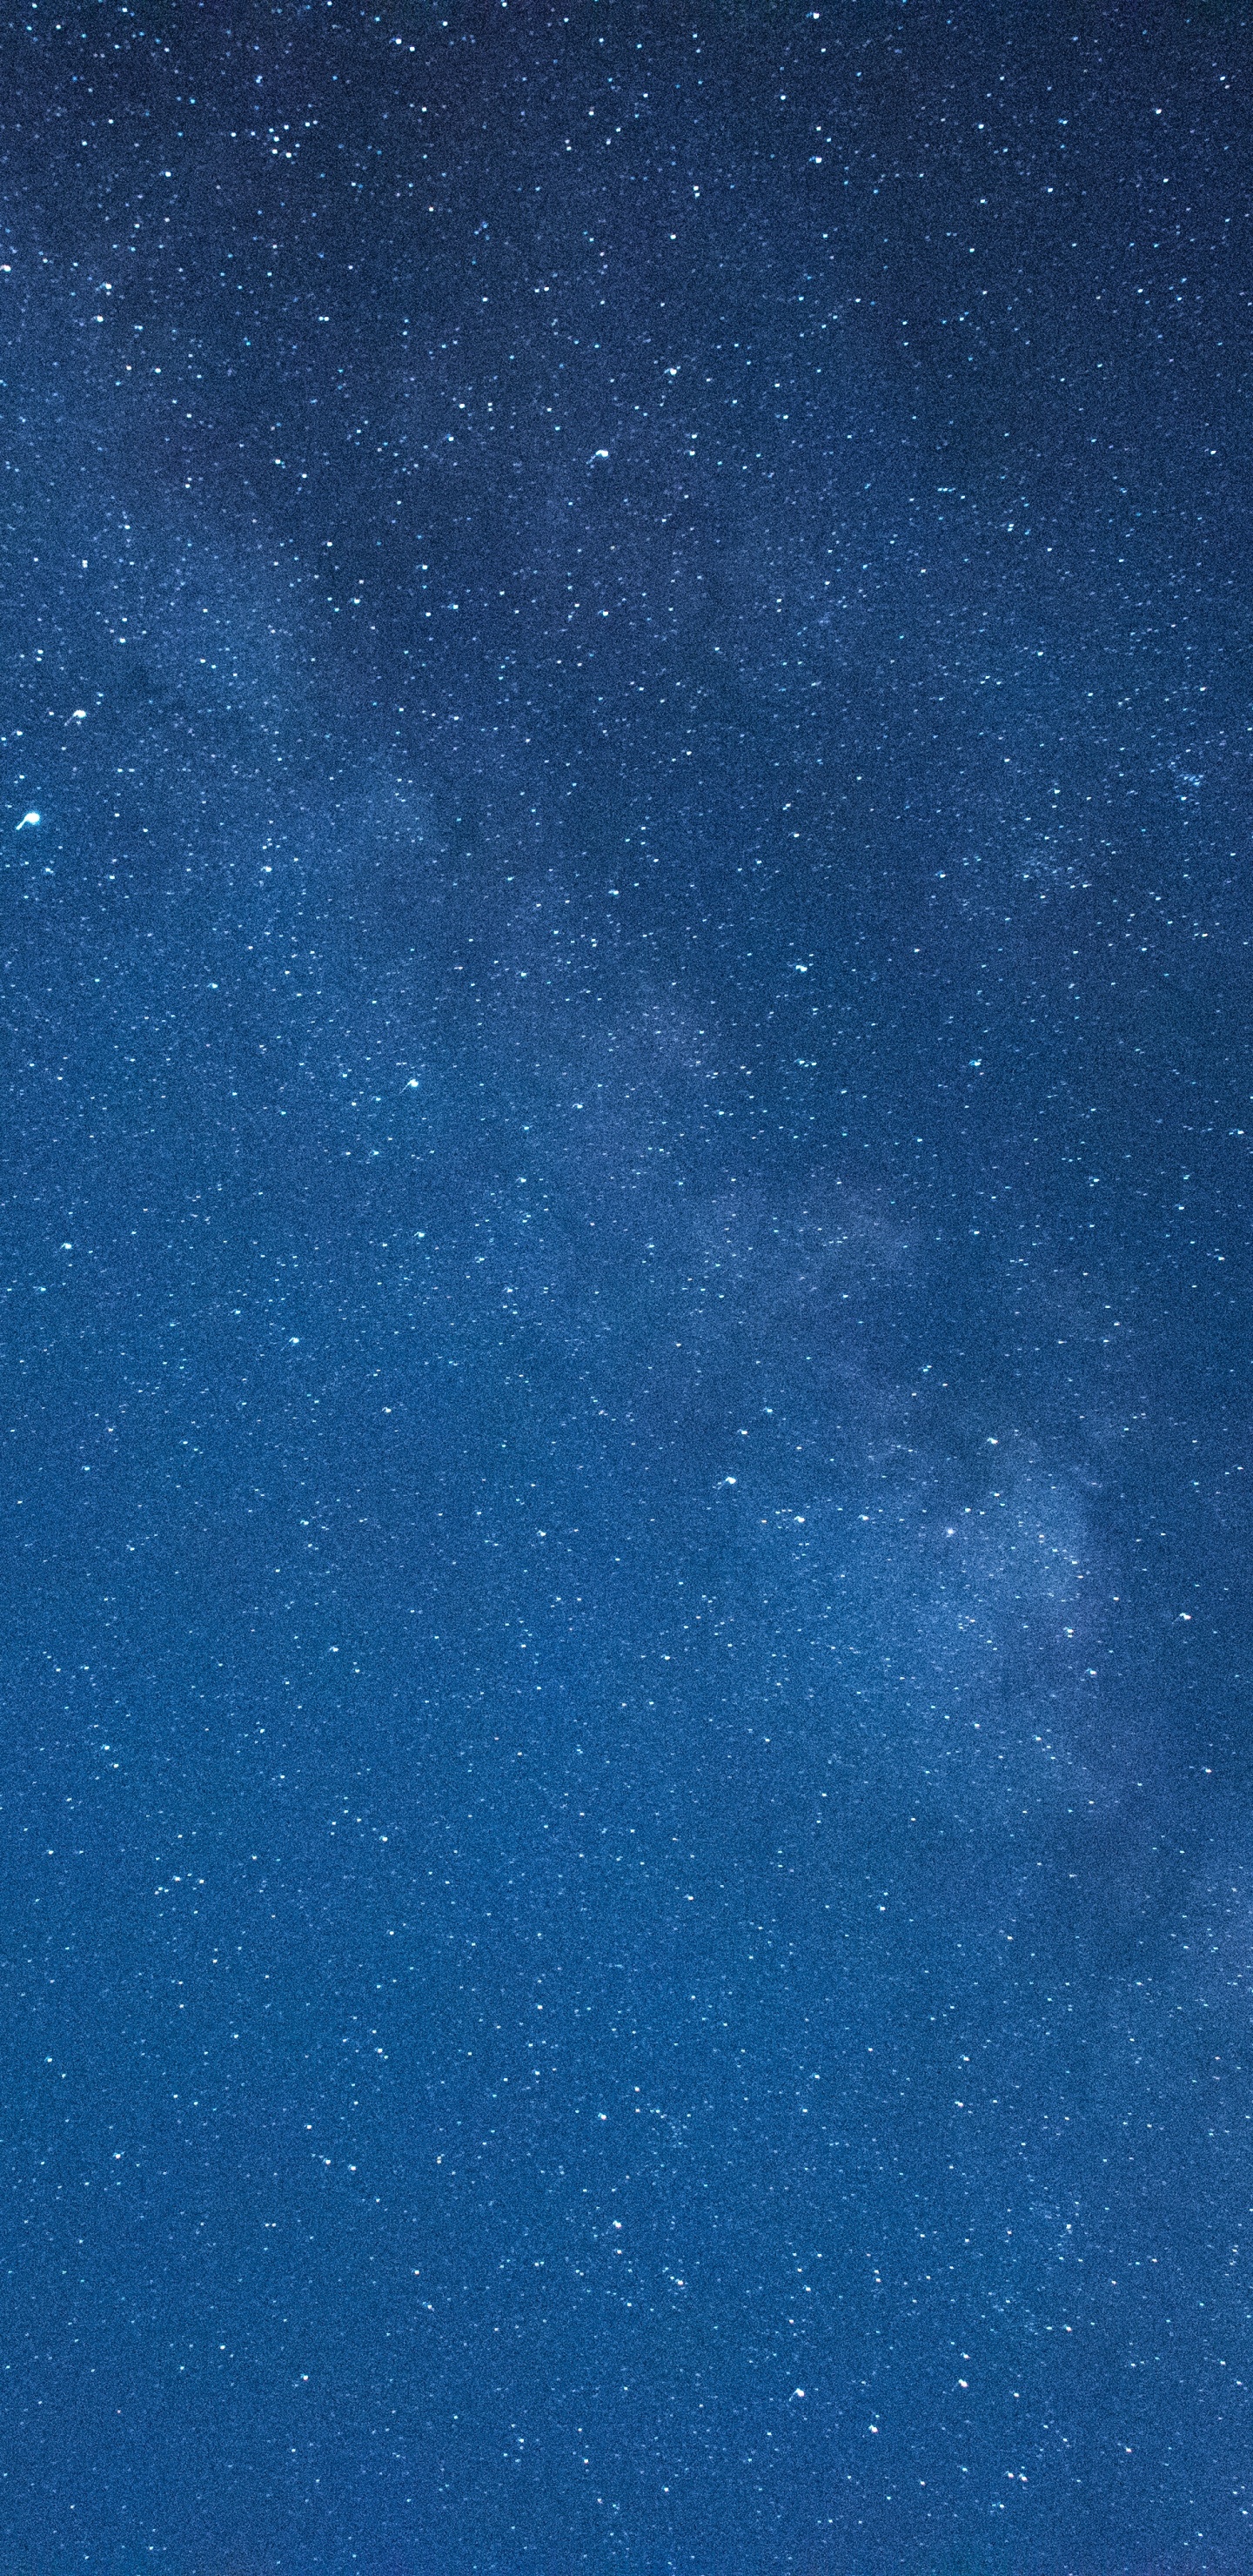 Blue Sky With Stars During Night Time. Wallpaper in 1440x2960 Resolution